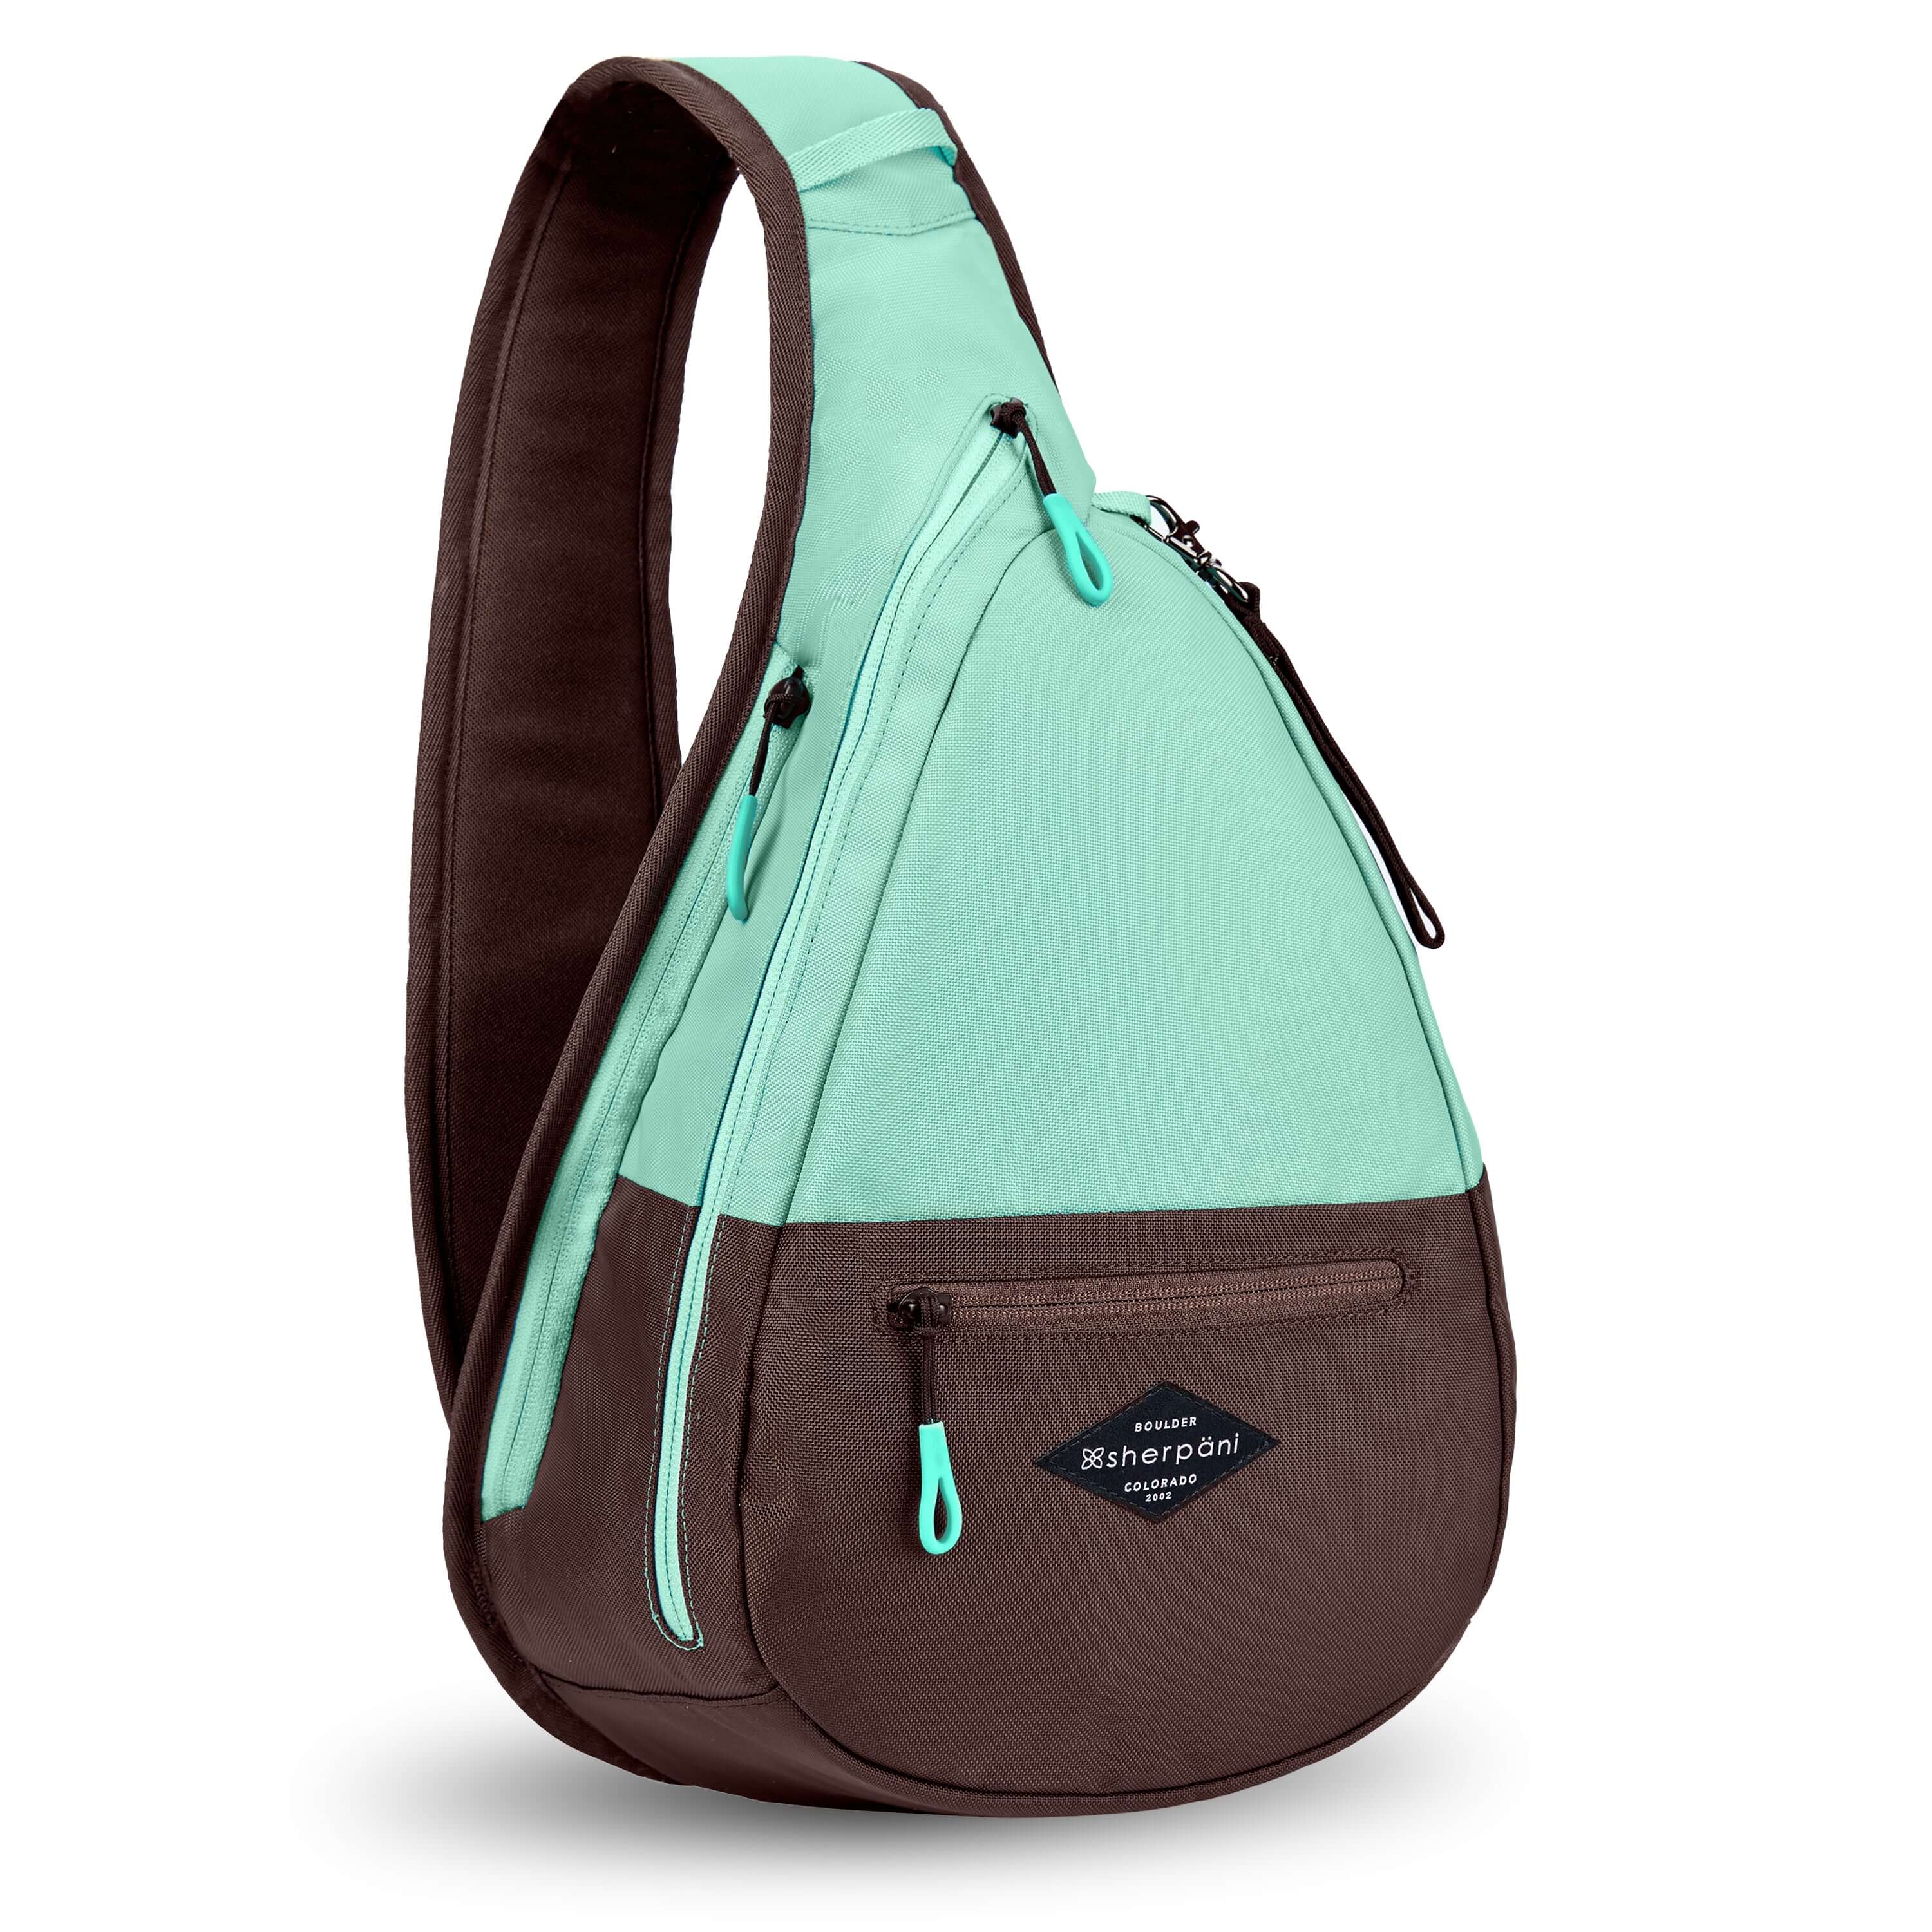 Angled front view of Sherpani's bag, the Esprit in Seagreen. The teardrop shaped bag is two-toned in light green and brown. There is a small zipper pocket on the front of the bag, the main zipper compartment in the middle, and another zipper pocket towards the back of the bag. It has easy-pull zippers accented in light green. A branded Sherpani keychain is clipped to a fabric loop near the top of the bag. #color_seagreen